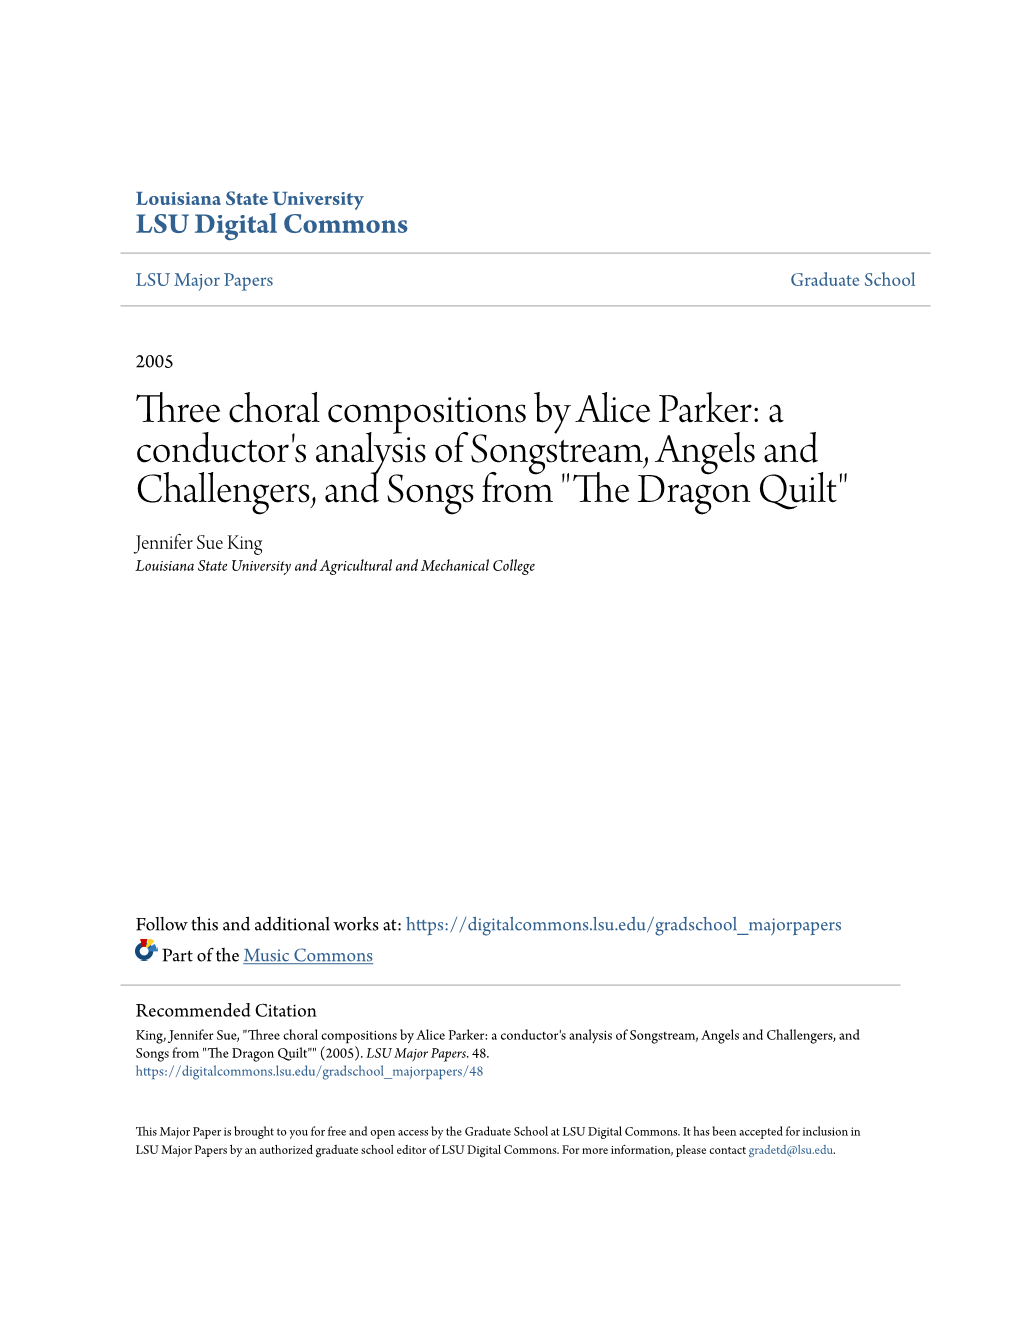 Three Choral Compositions by Alice Parker